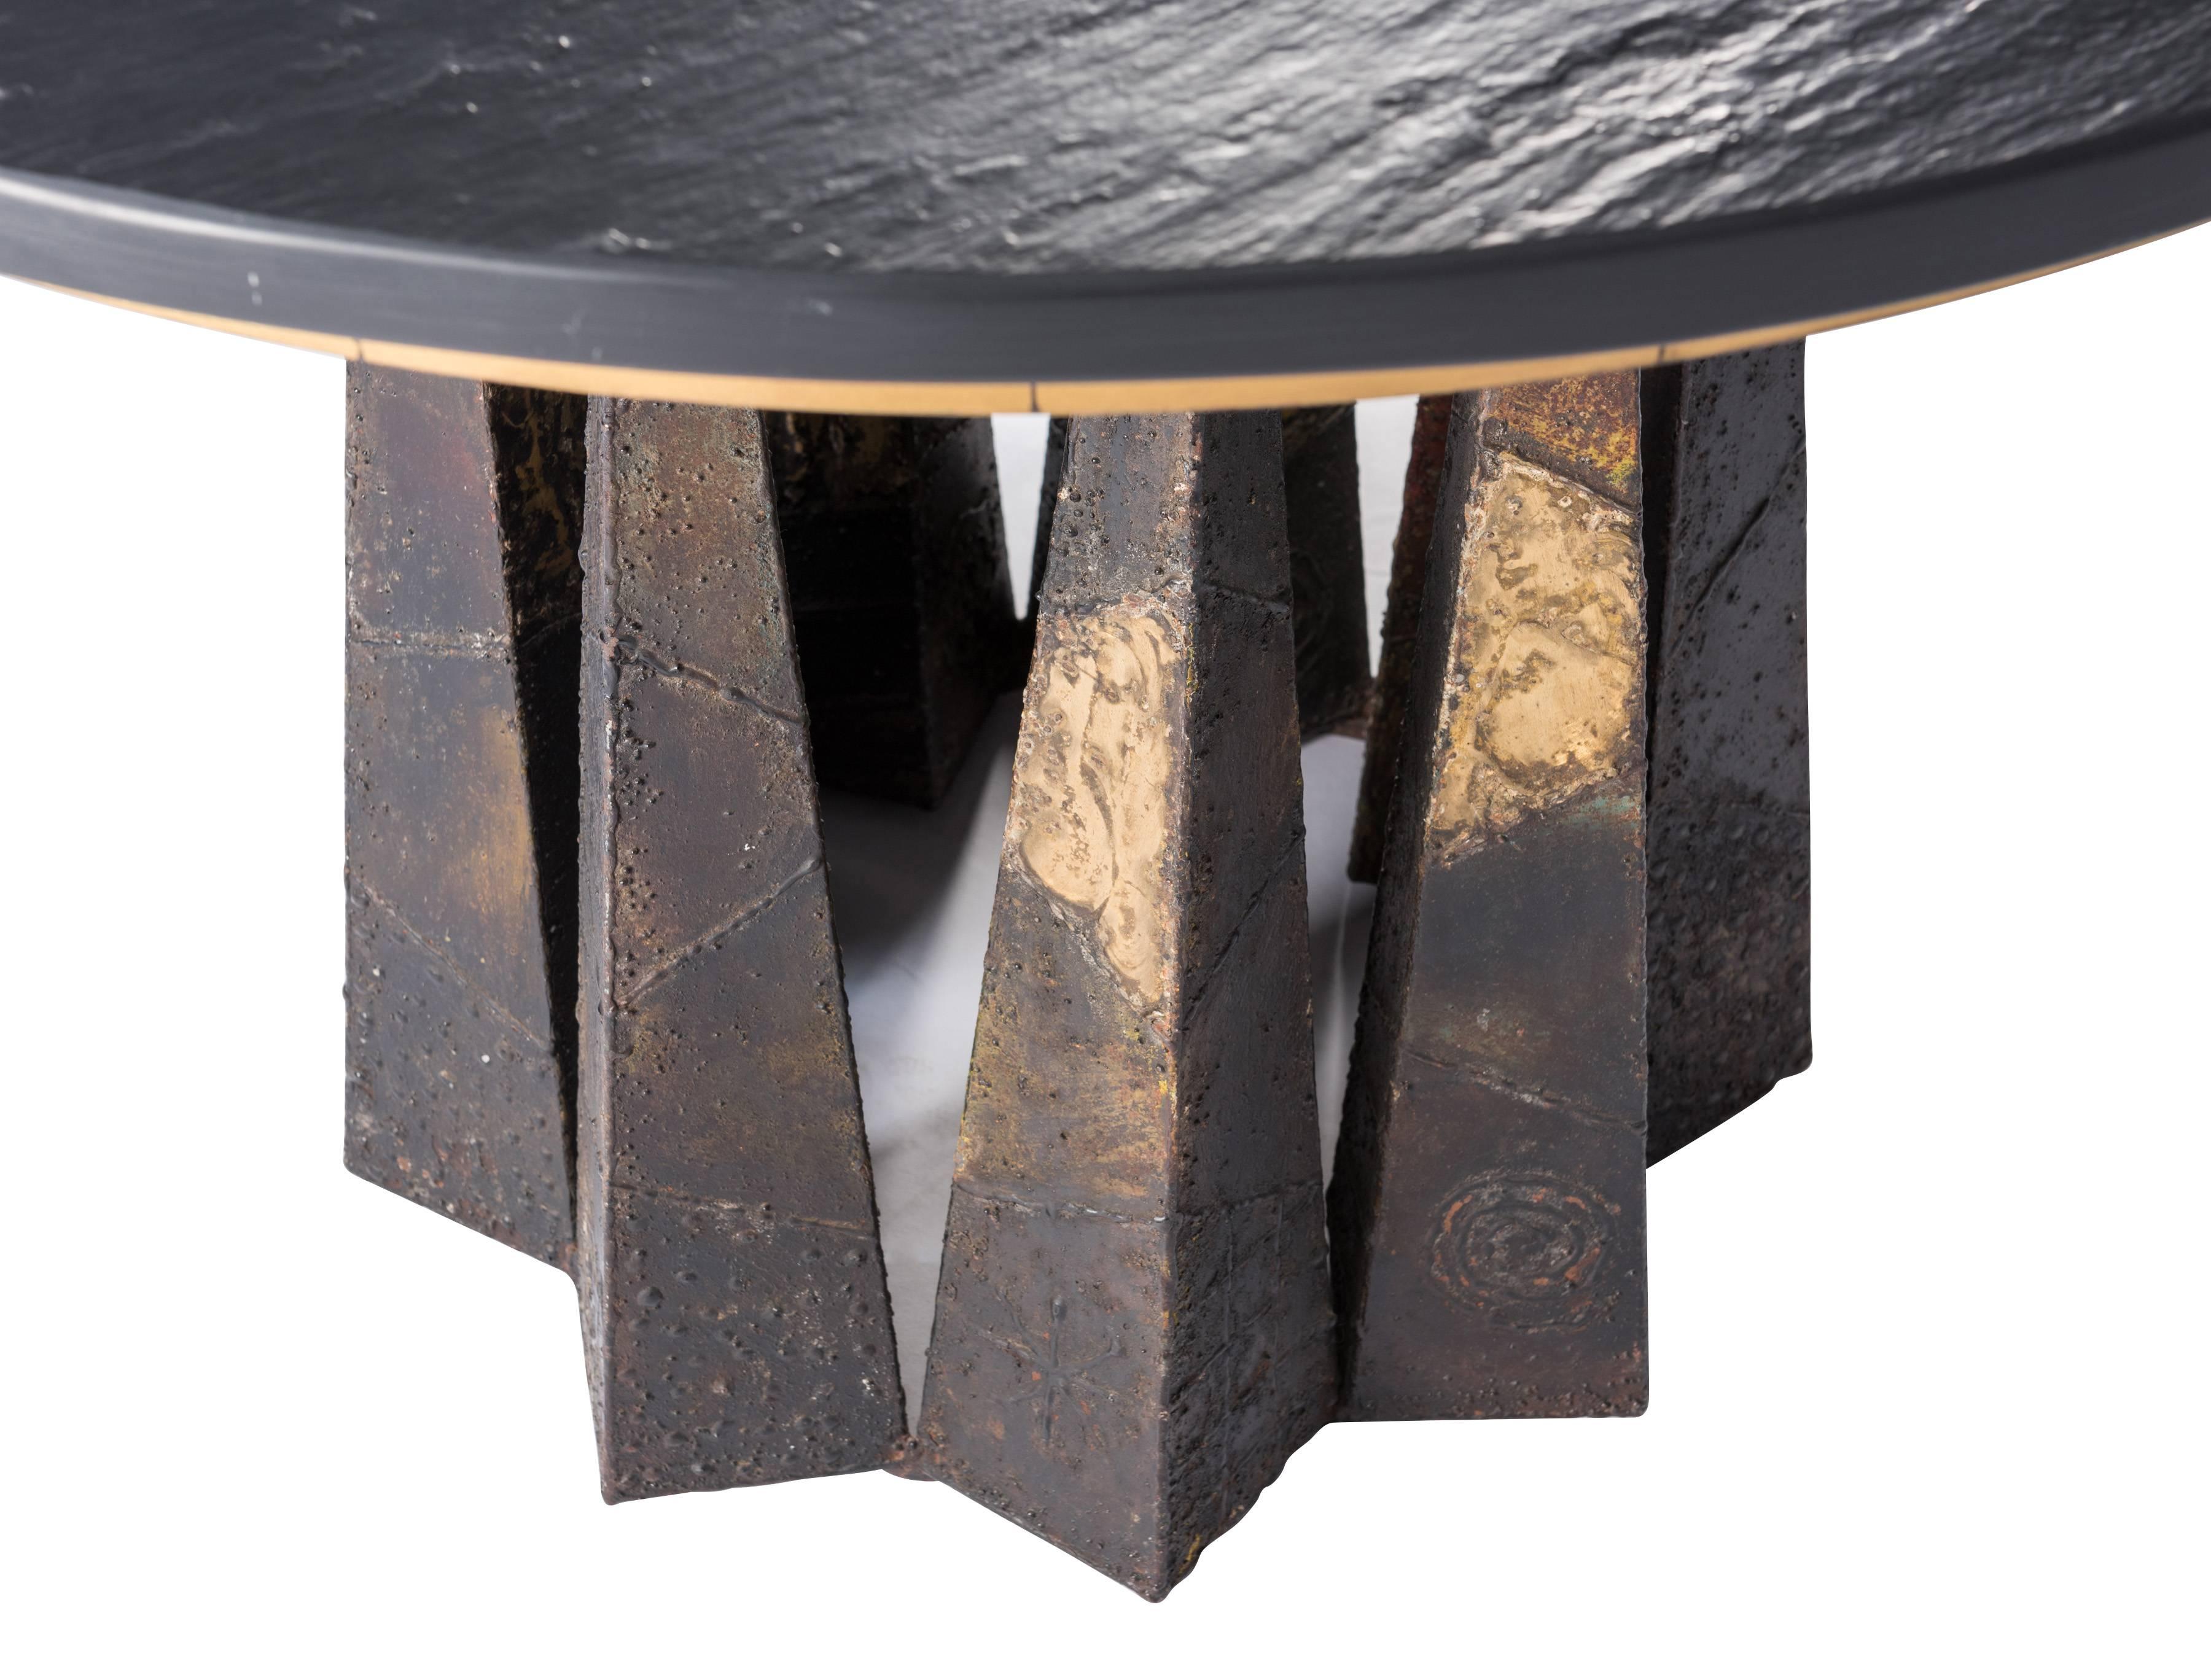 Welded and patinated steel dining table with replaced slate top designed by Paul Evans Signed and dated P.E. 74.